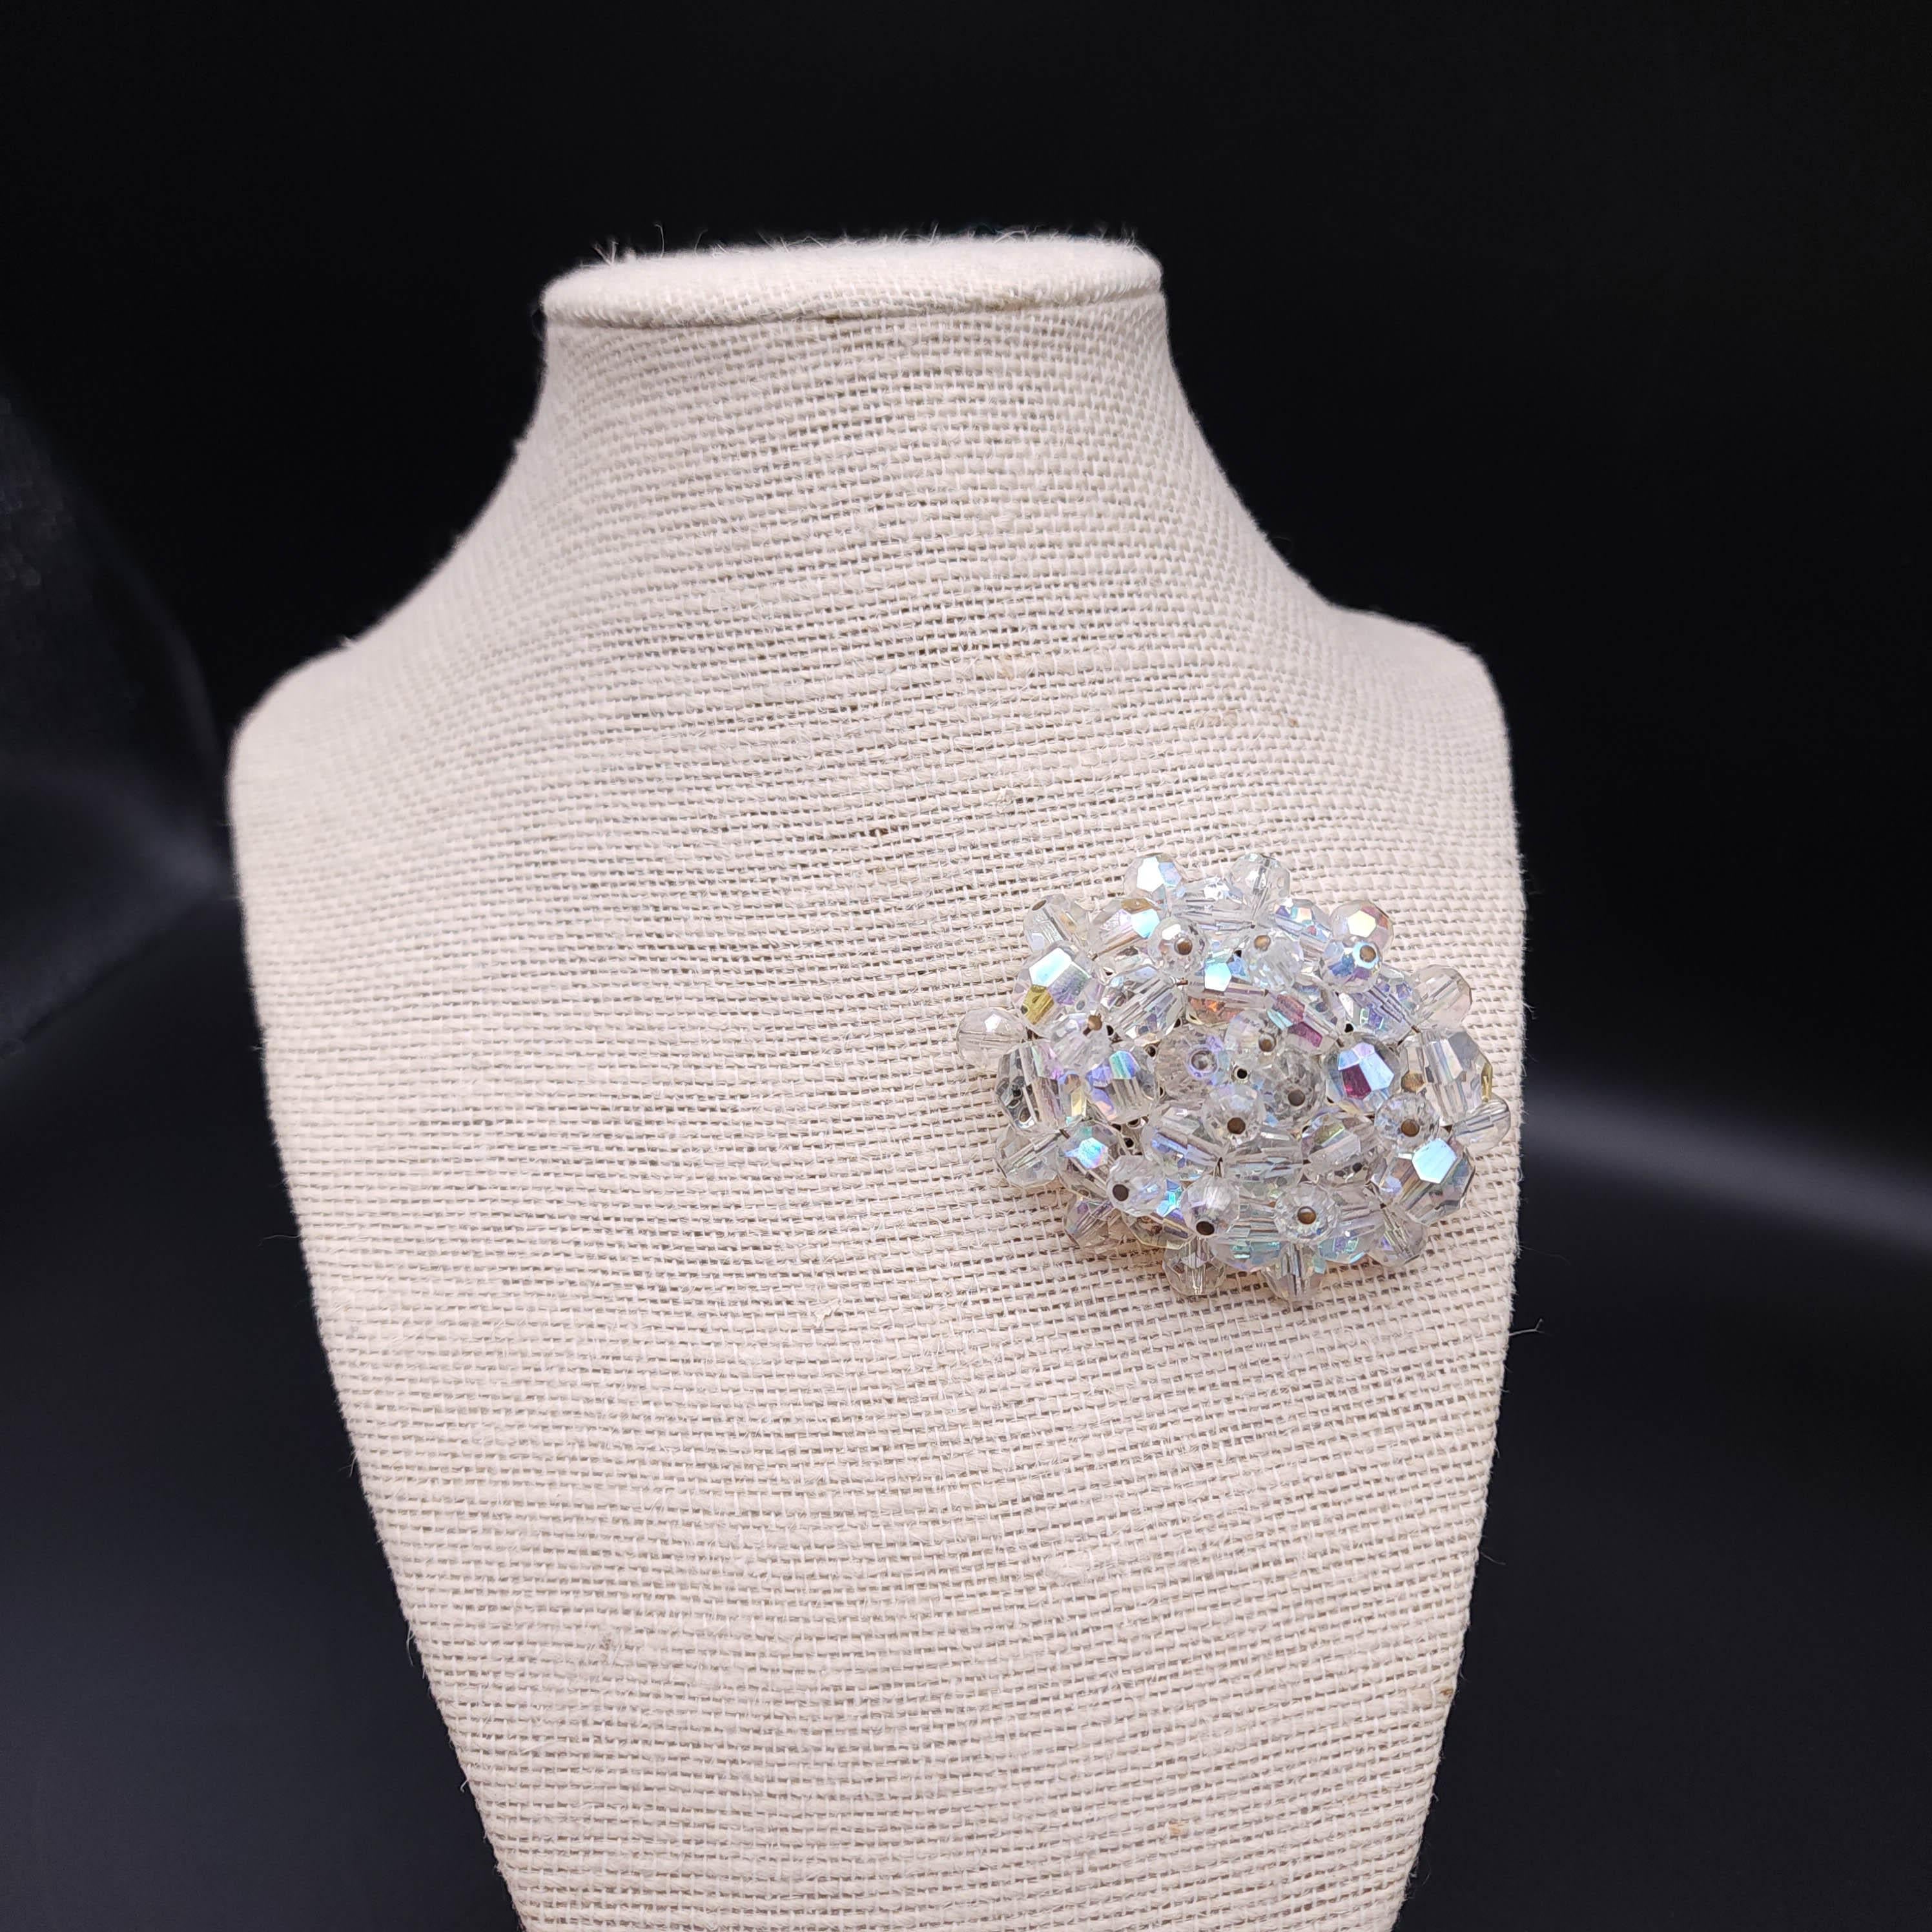 Add a touch of vintage sparkle to your ensemble with this clear aurora borealis crystal cluster oval brooch. This exquisite piece showcases a radiant cluster of Aurora Borealis crystals, known for their mesmerizing play of colors that mimic the